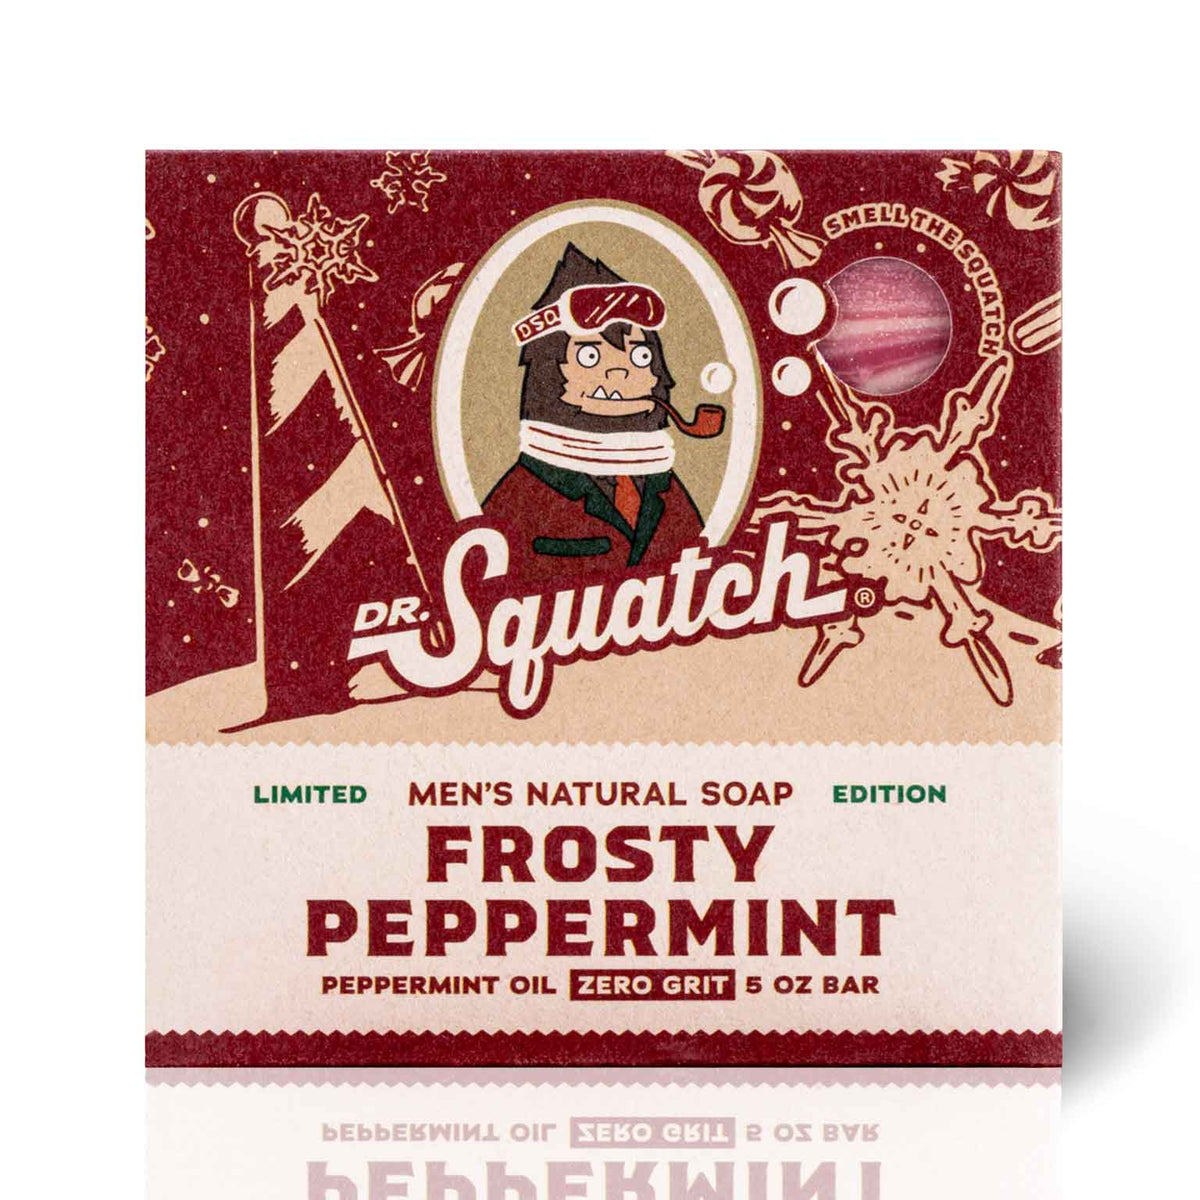 dr squatch shampoo and conditioner frosty peppermint｜TikTok Search